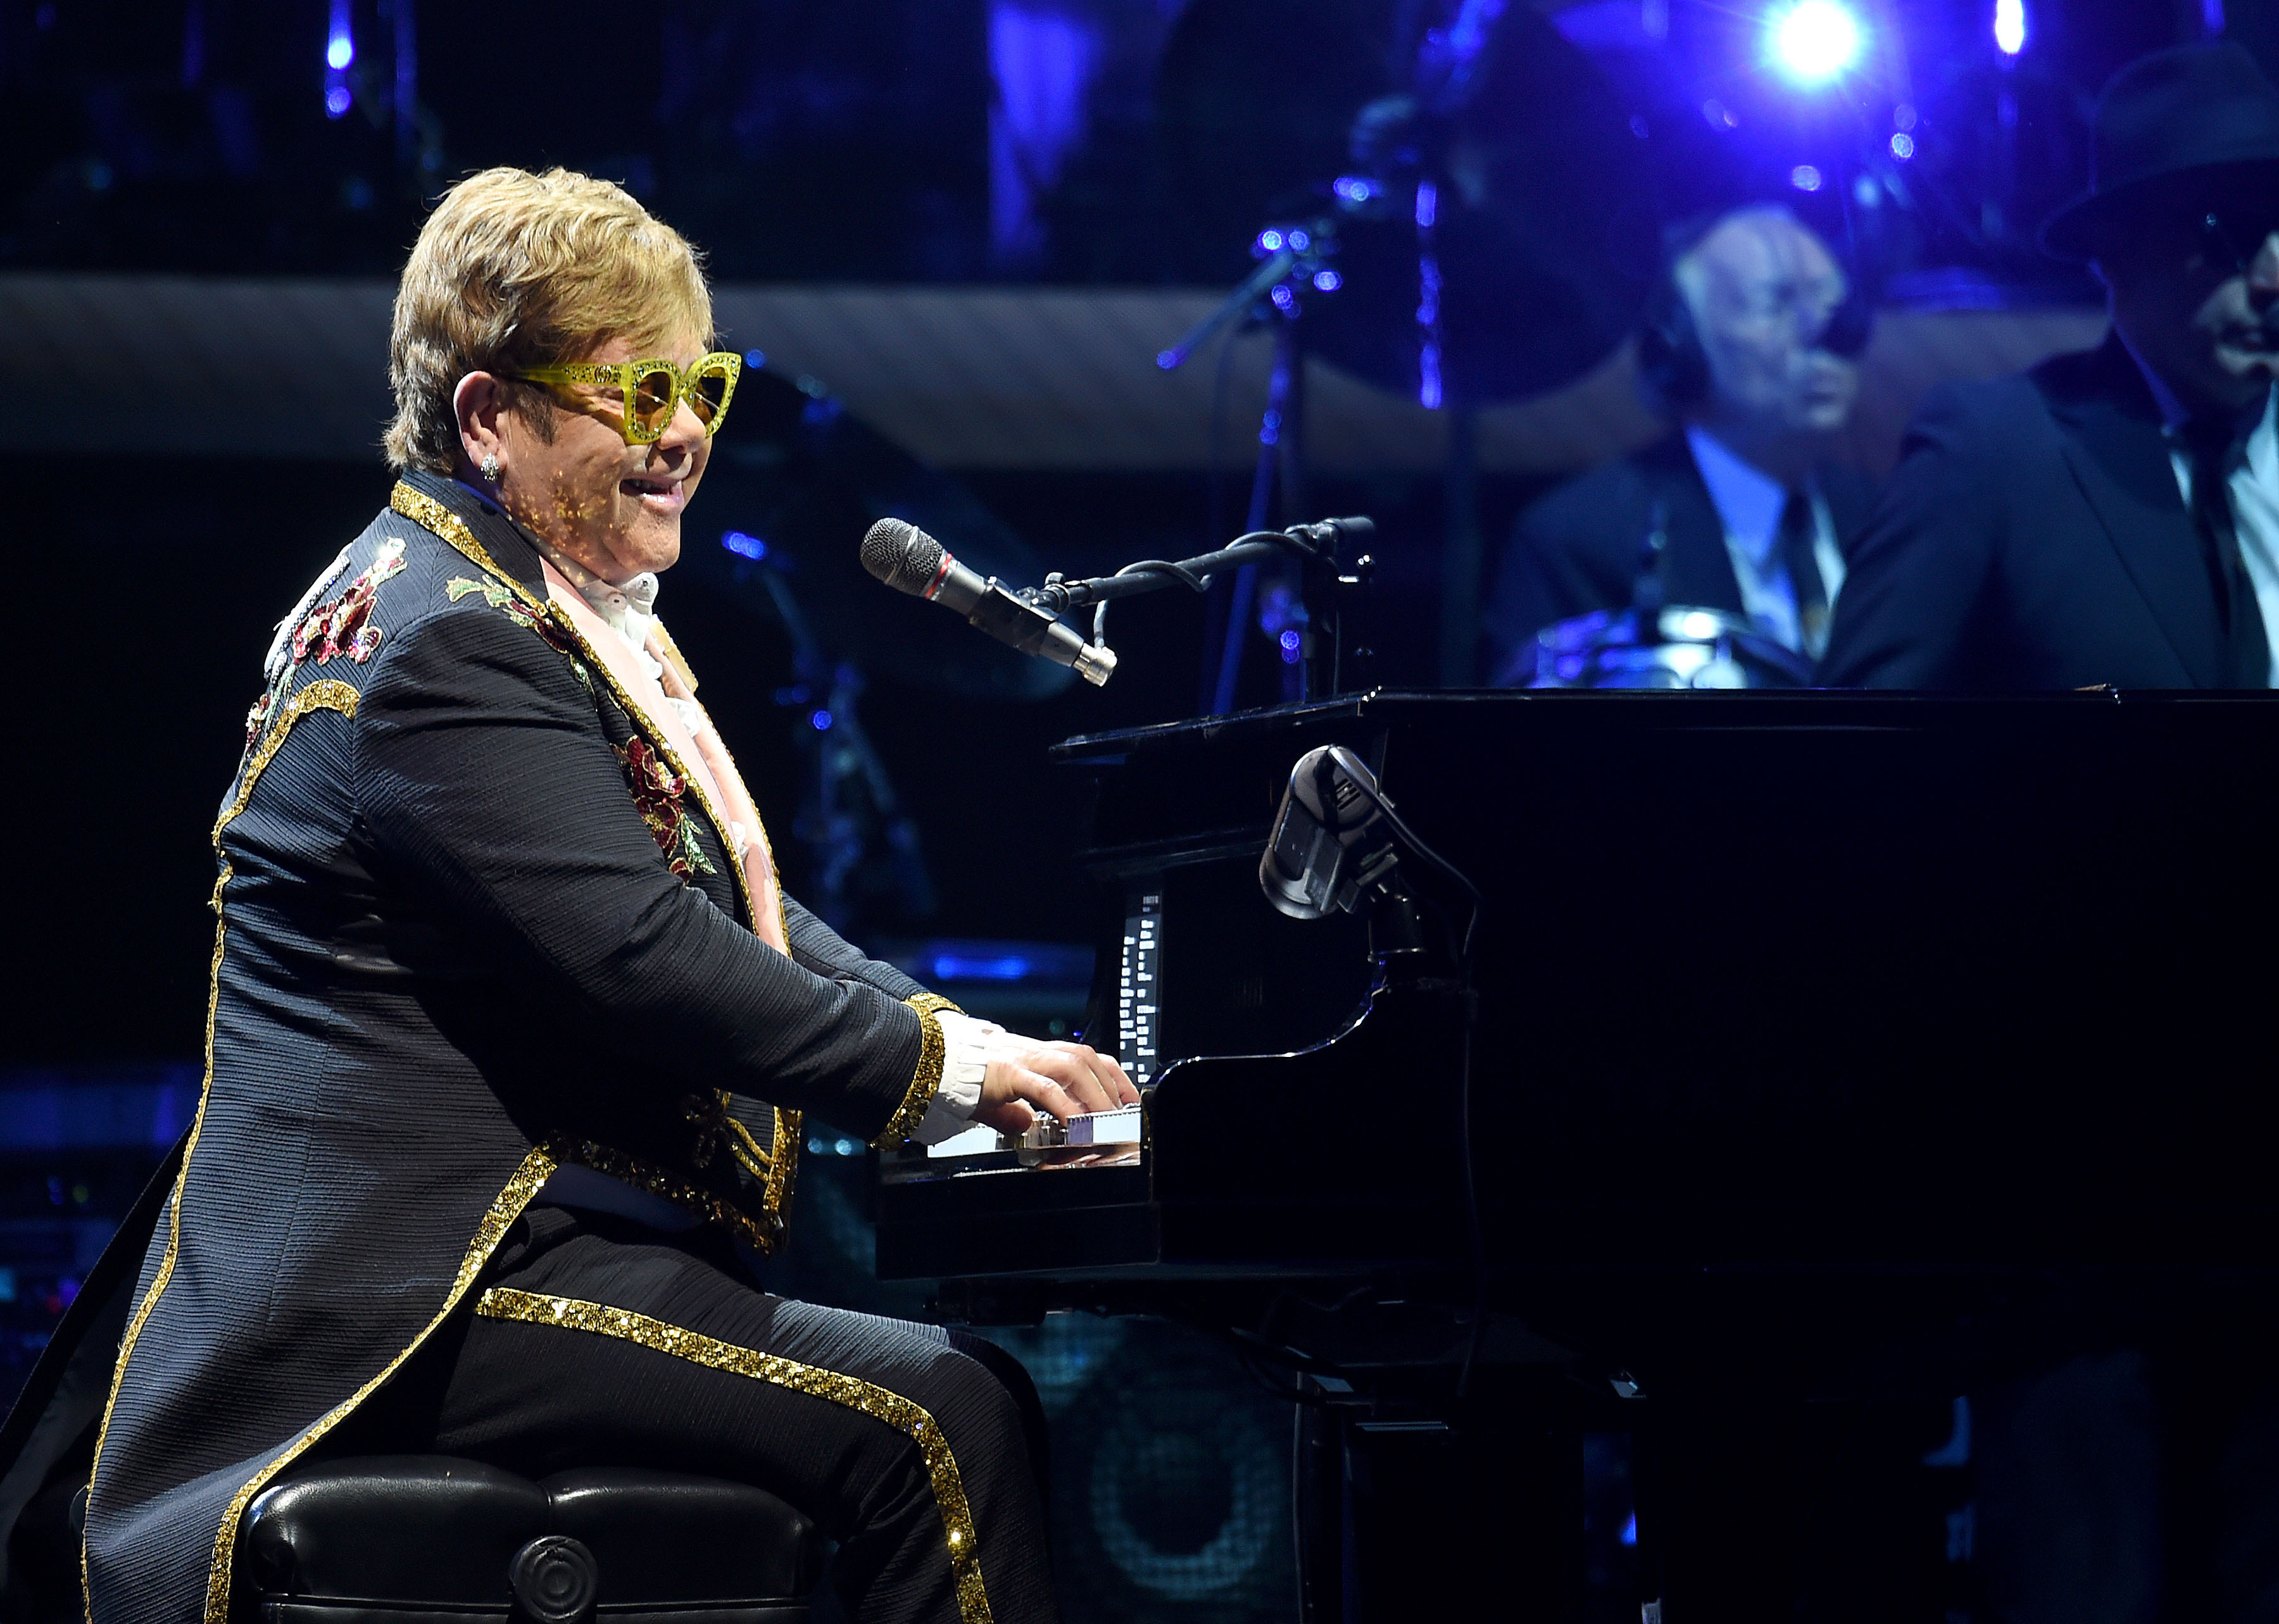 Elton John performs at Madison Square Garden in New York City in 2019